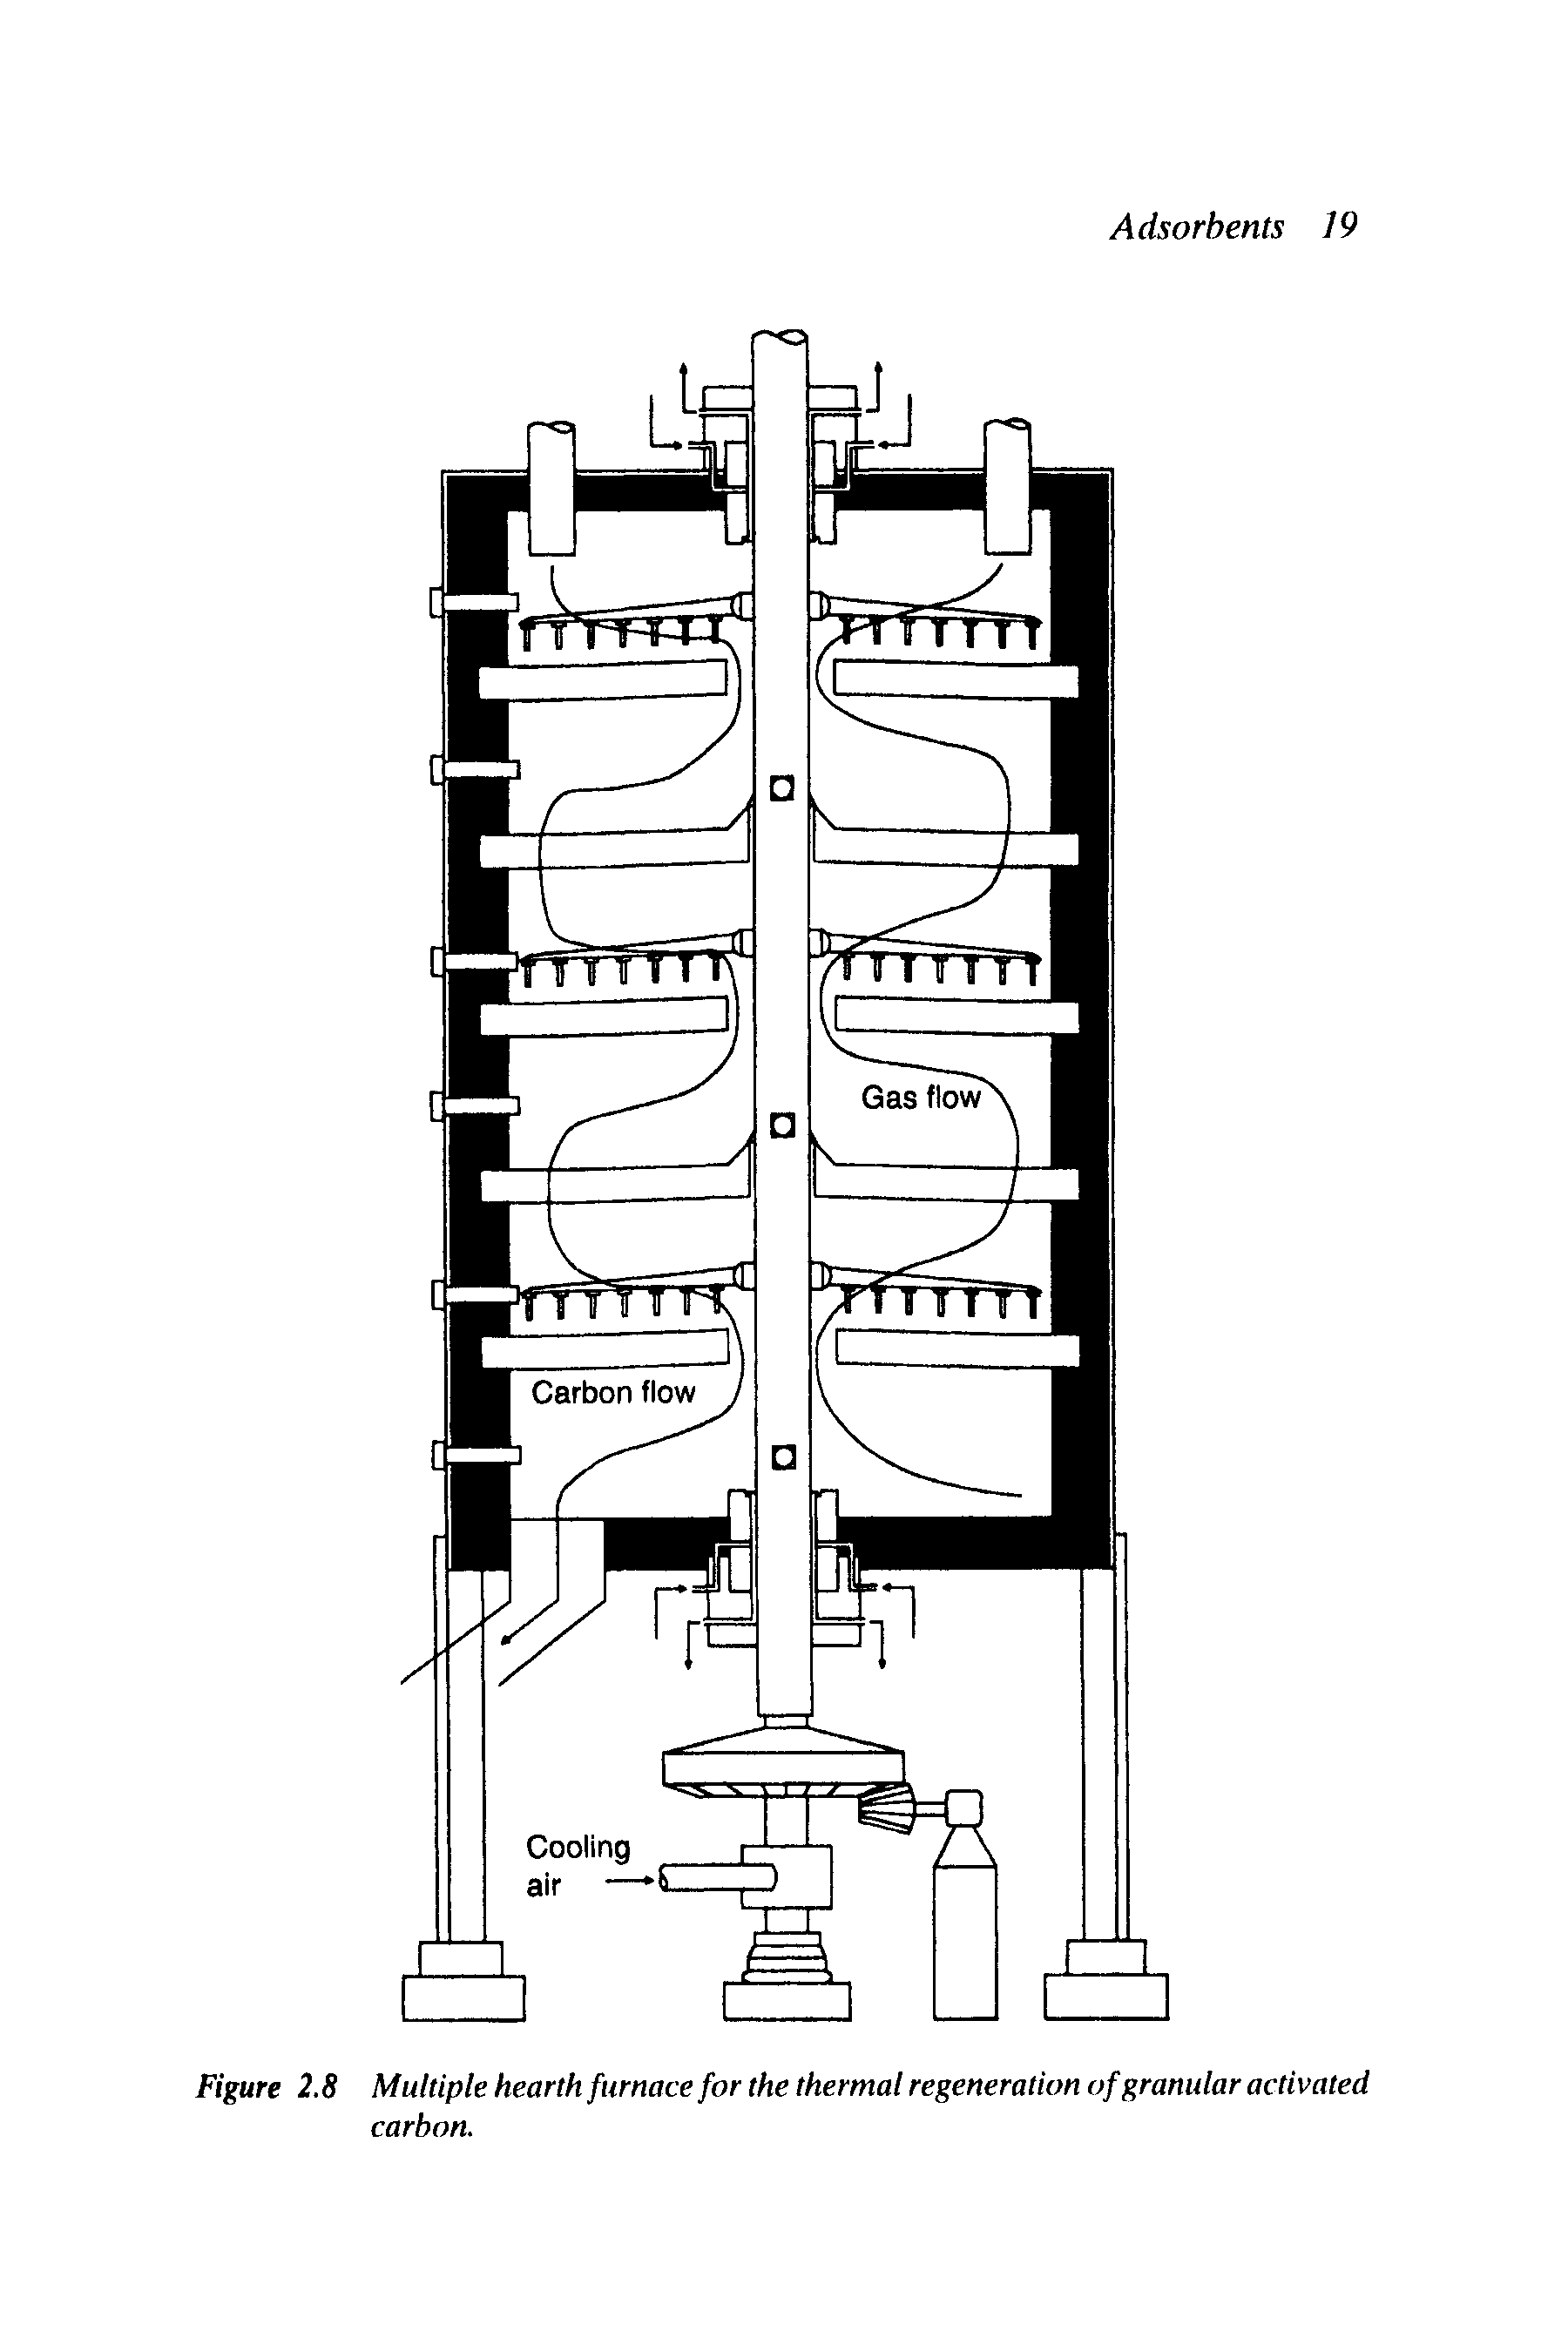 Figure 2.8 Multiple hearth furnace for the thermal regeneration of granular activated carbon.